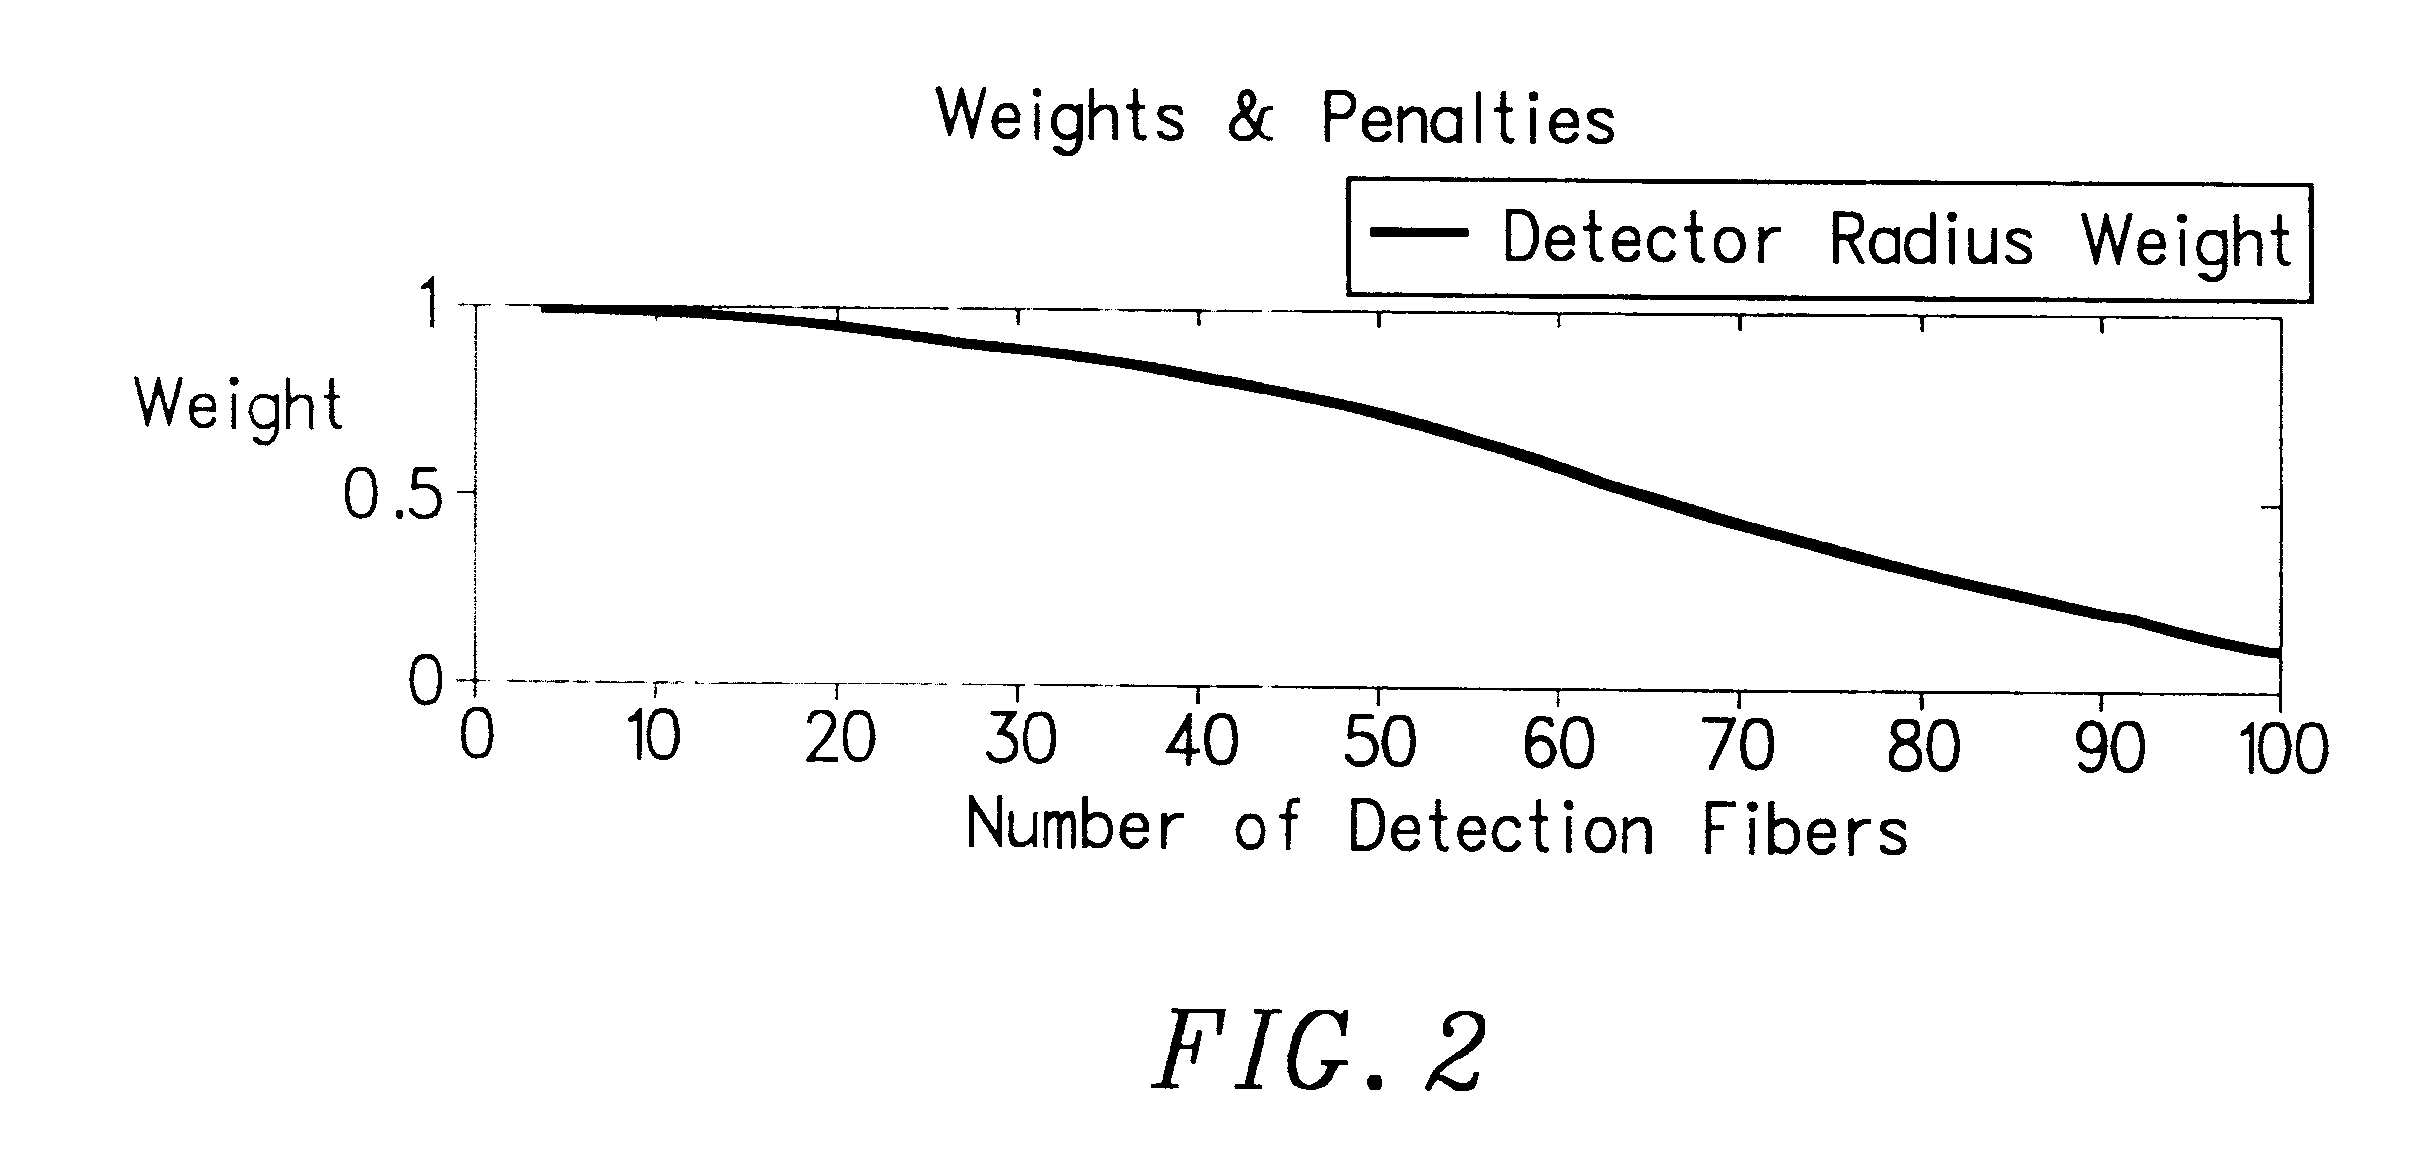 Fiber optic illumination and detection patterns, shapes, and locations for use in spectroscopic analysis